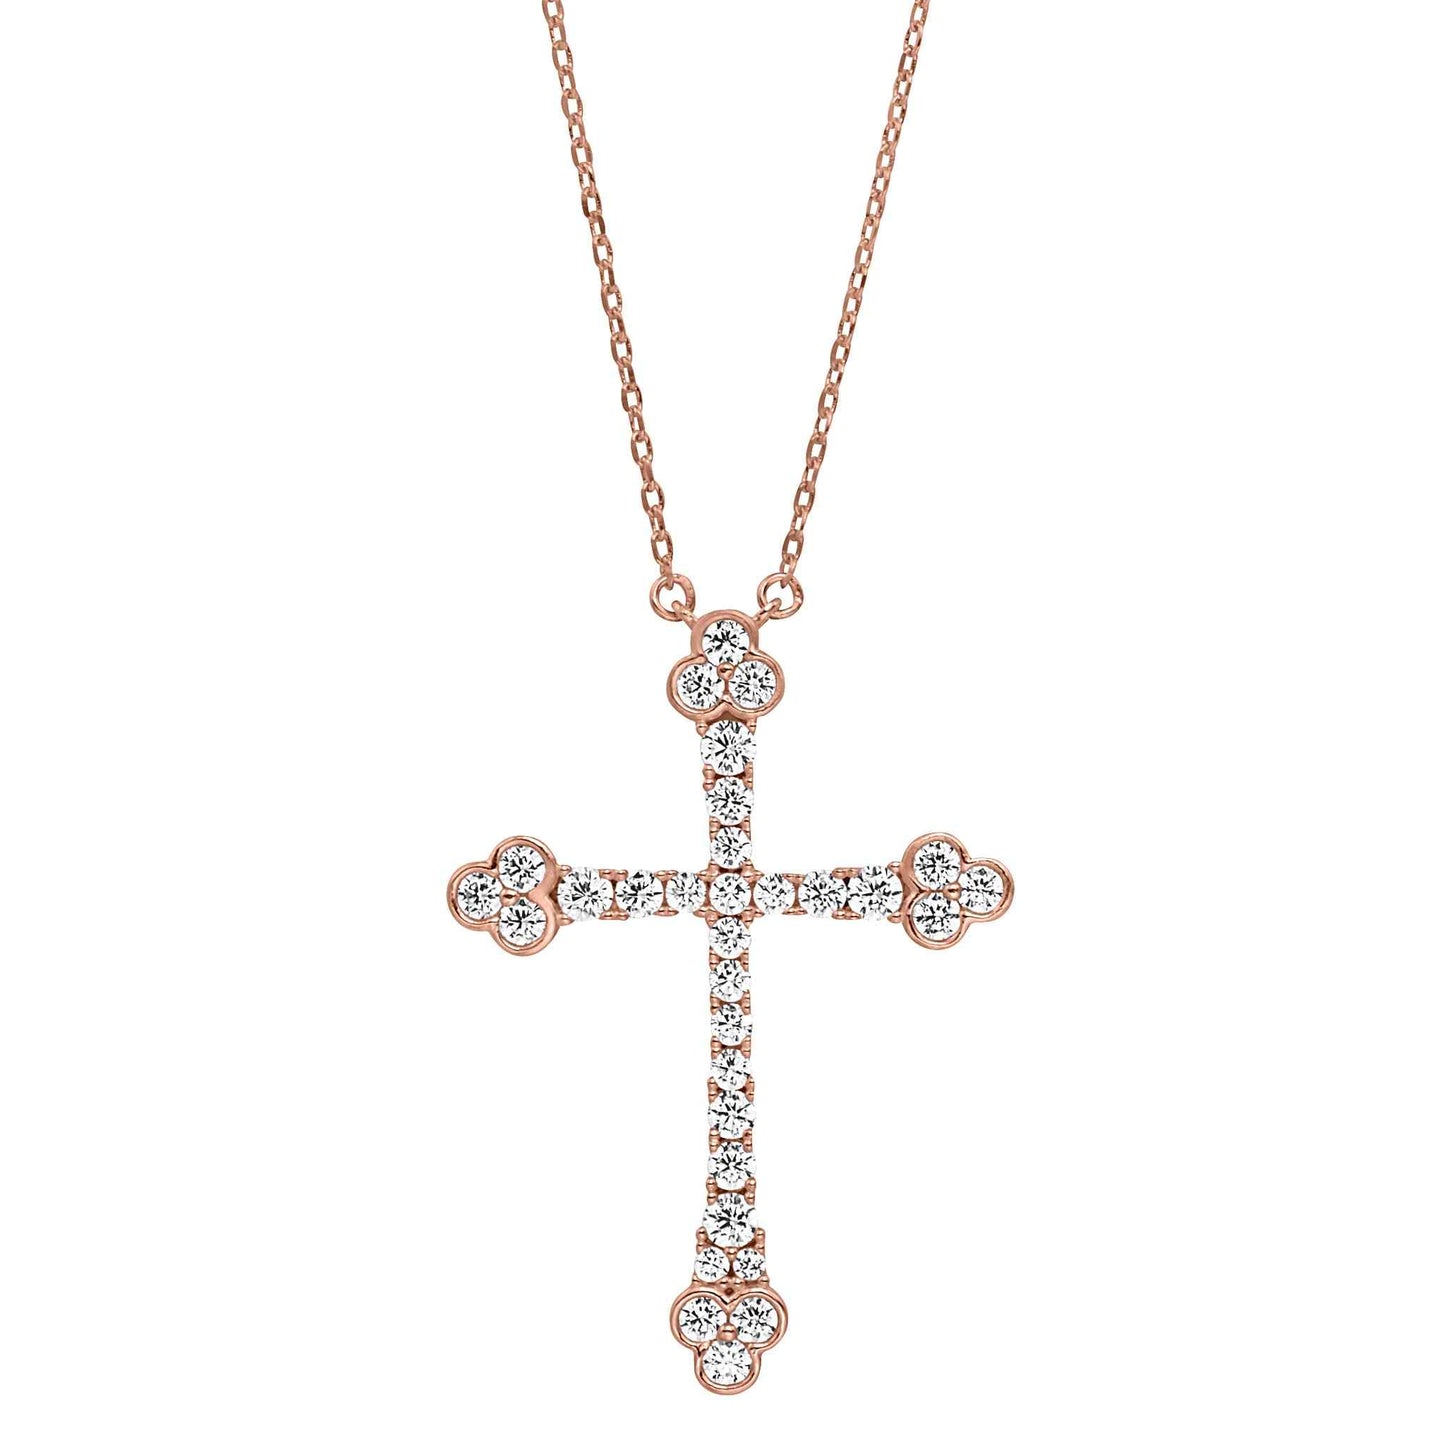 A cross necklace with triple simulated diamond accents displayed on a neutral white background.